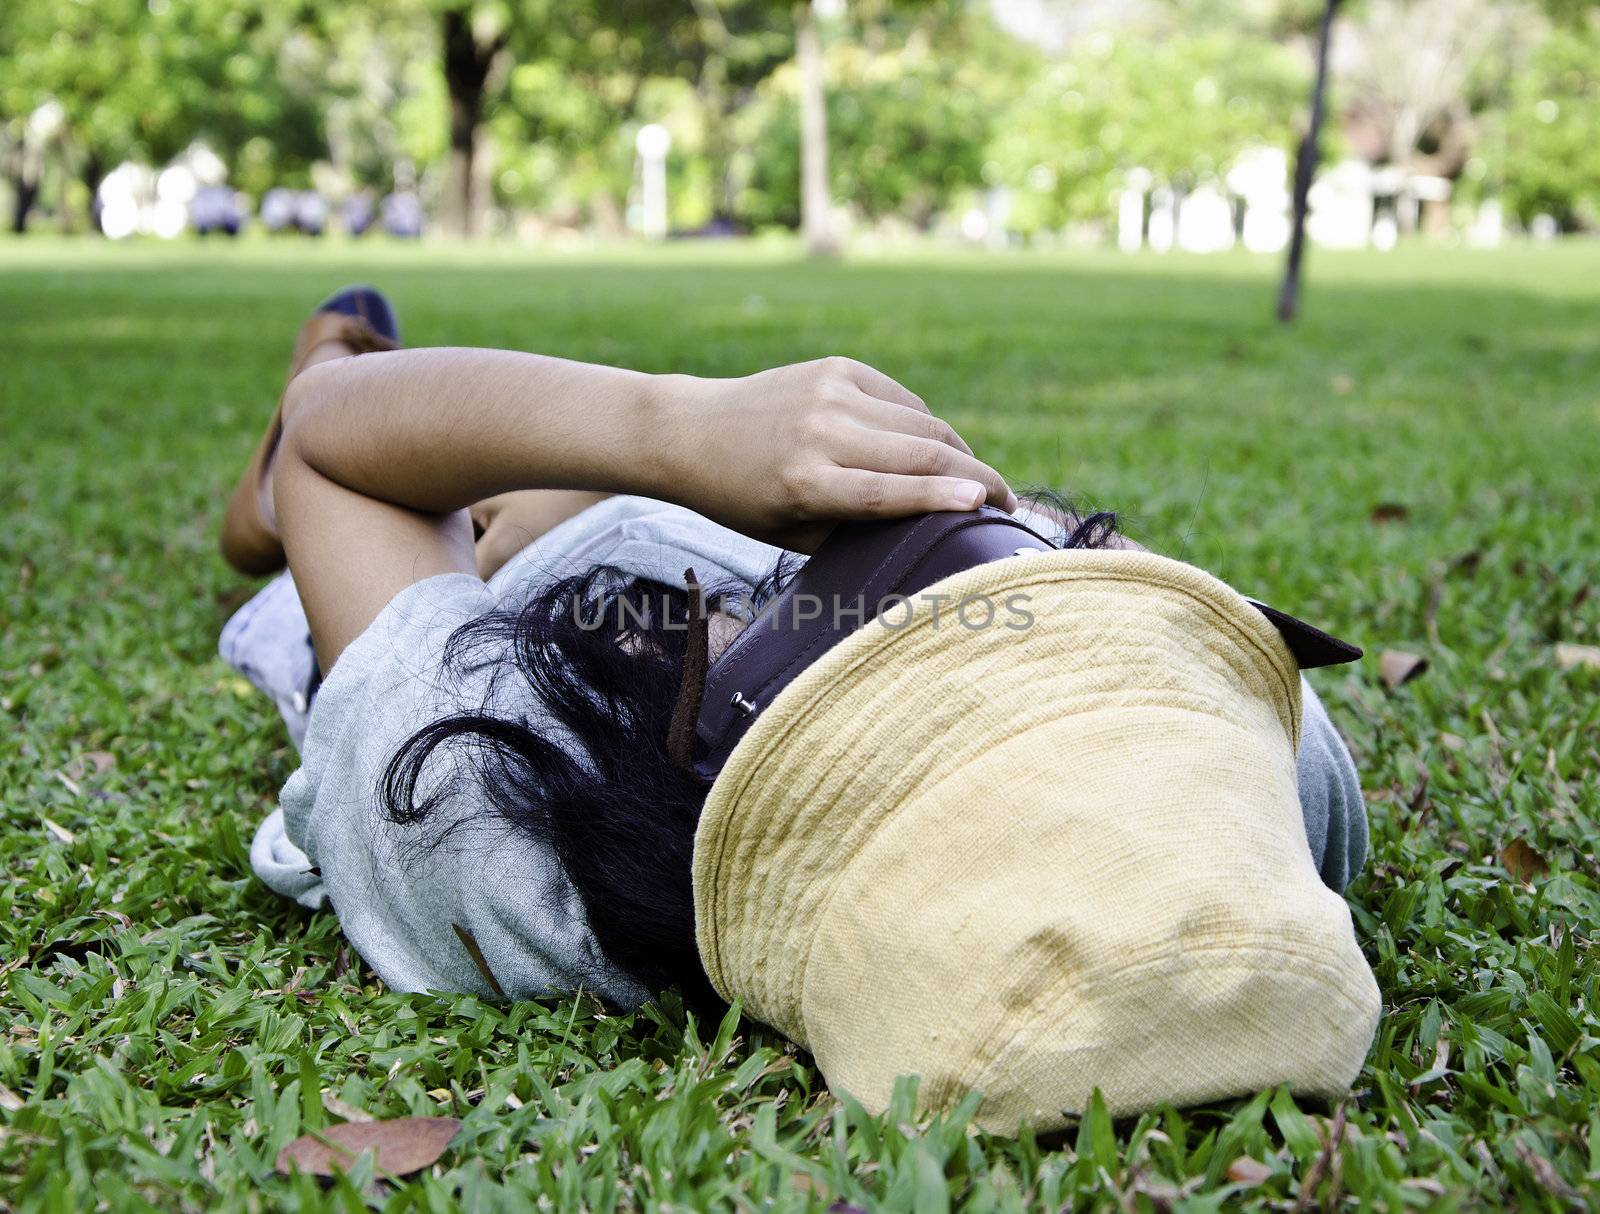 Exhausted student over the grass in the park 